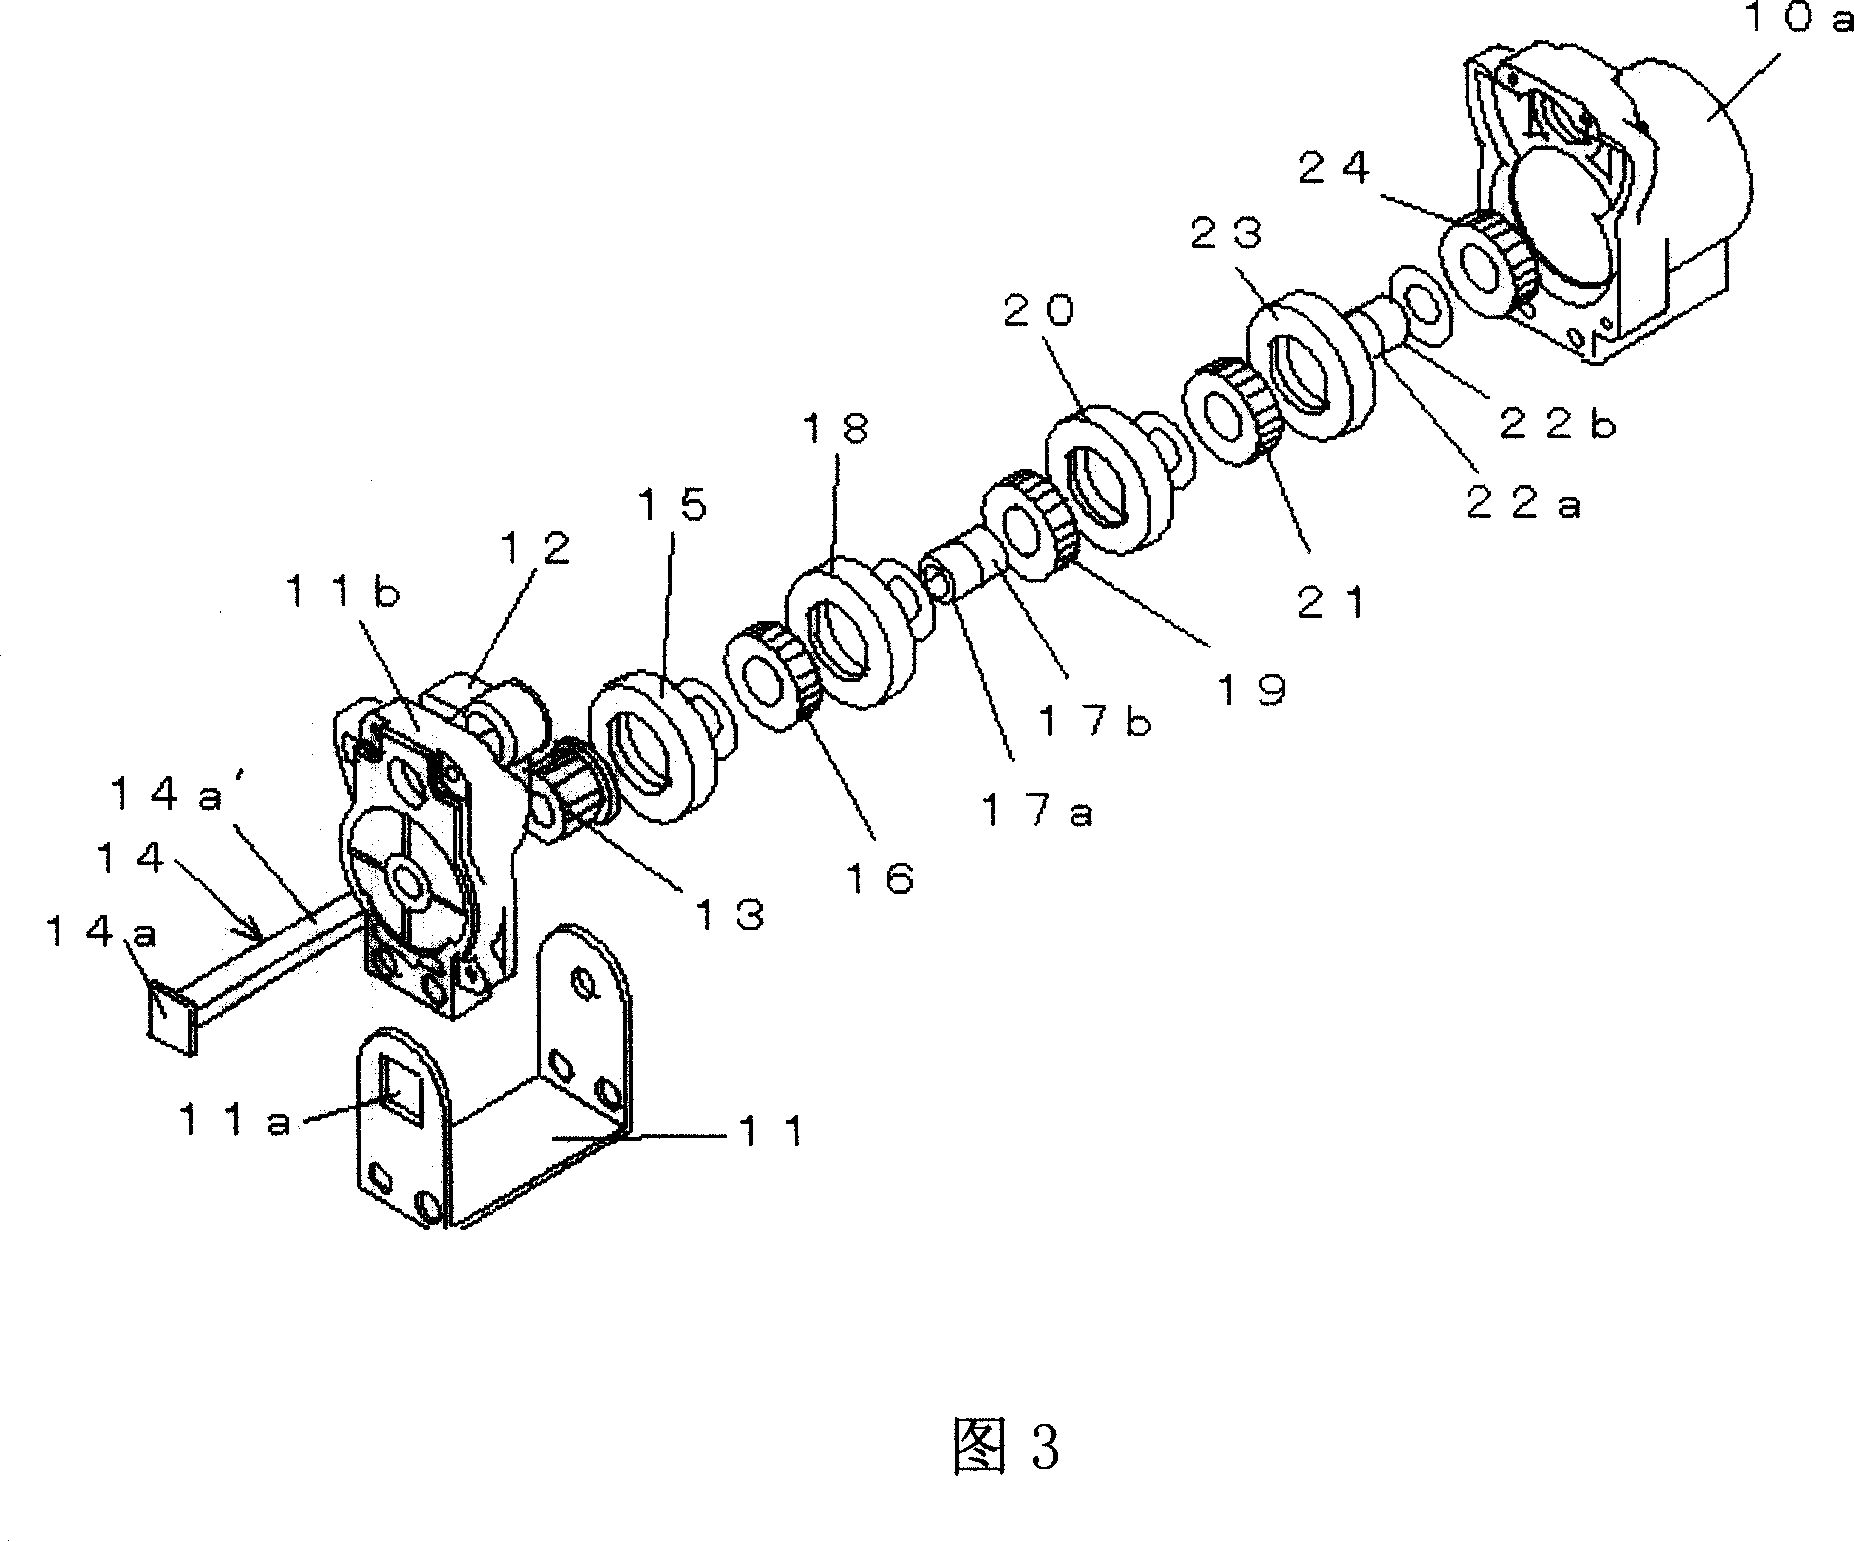 Hinge buffer for open-close device